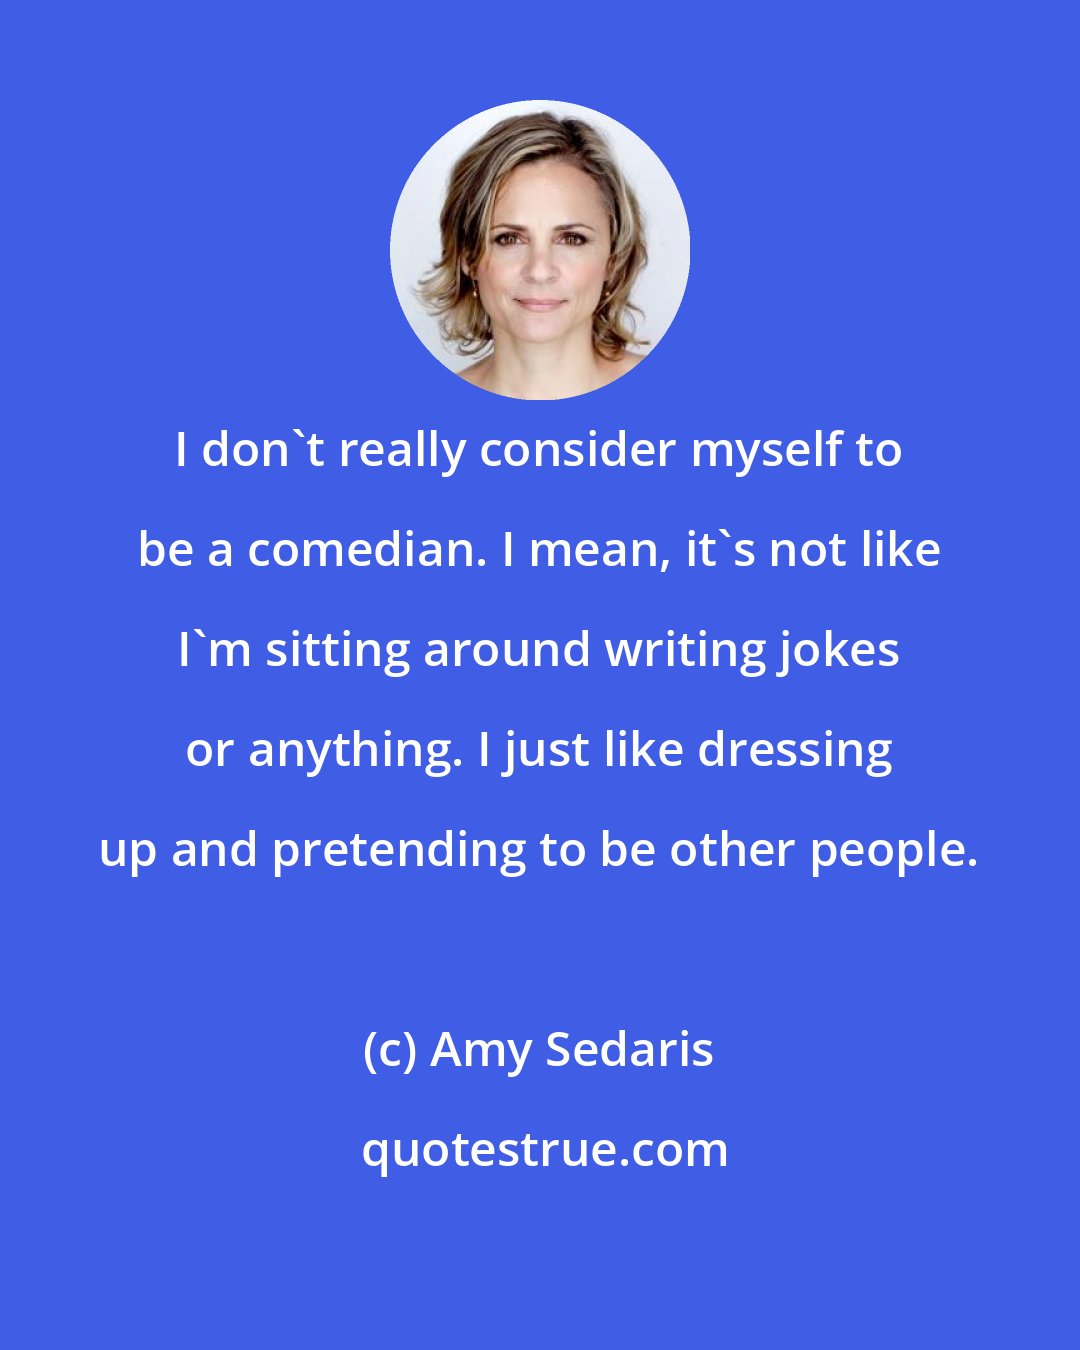 Amy Sedaris: I don't really consider myself to be a comedian. I mean, it's not like I'm sitting around writing jokes or anything. I just like dressing up and pretending to be other people.